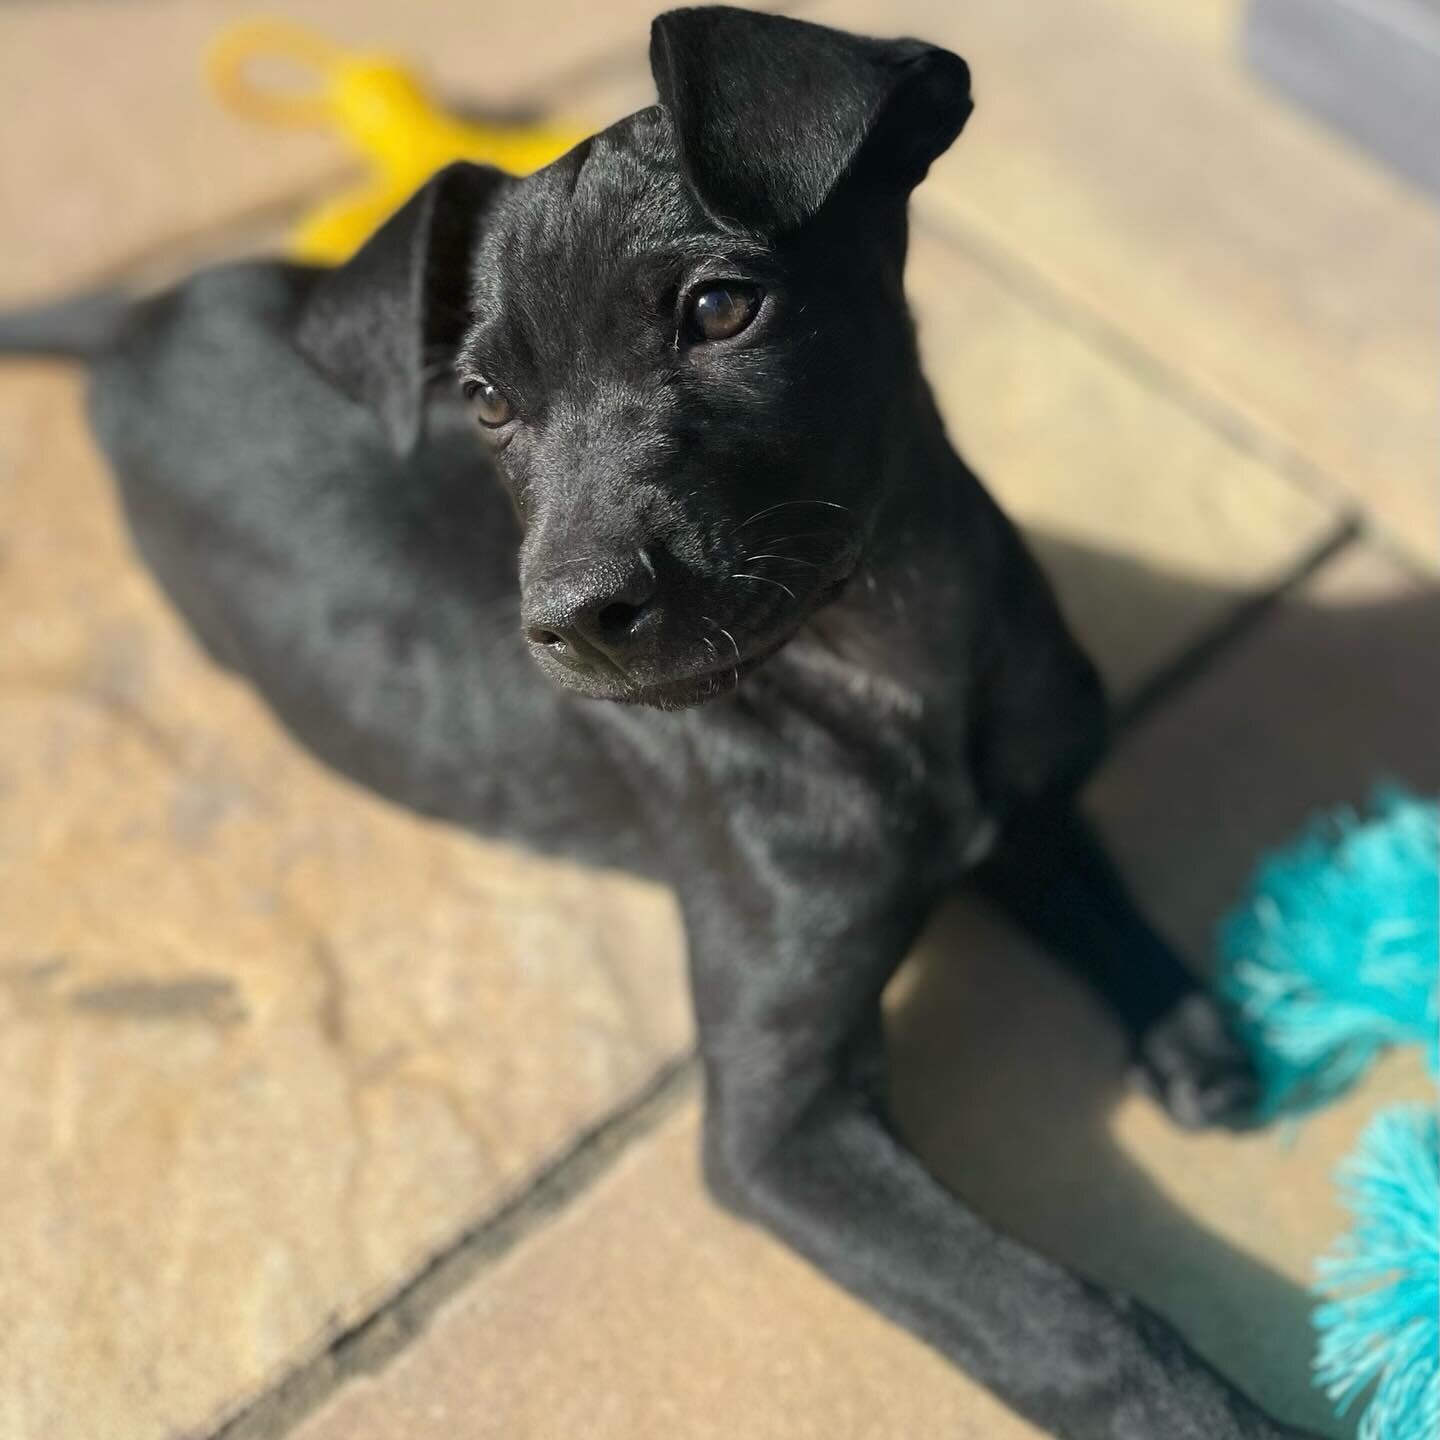 Meet our extra handsome pup Felix 😍 Felix is looking for a foster or adopter. All of Felix&rsquo;s siblings have already found their furever home, now it&rsquo;s Felix&rsquo;s turn!⁣
⁣
This sweet little guy is a 10 week old terrier/cattle dog mix pu